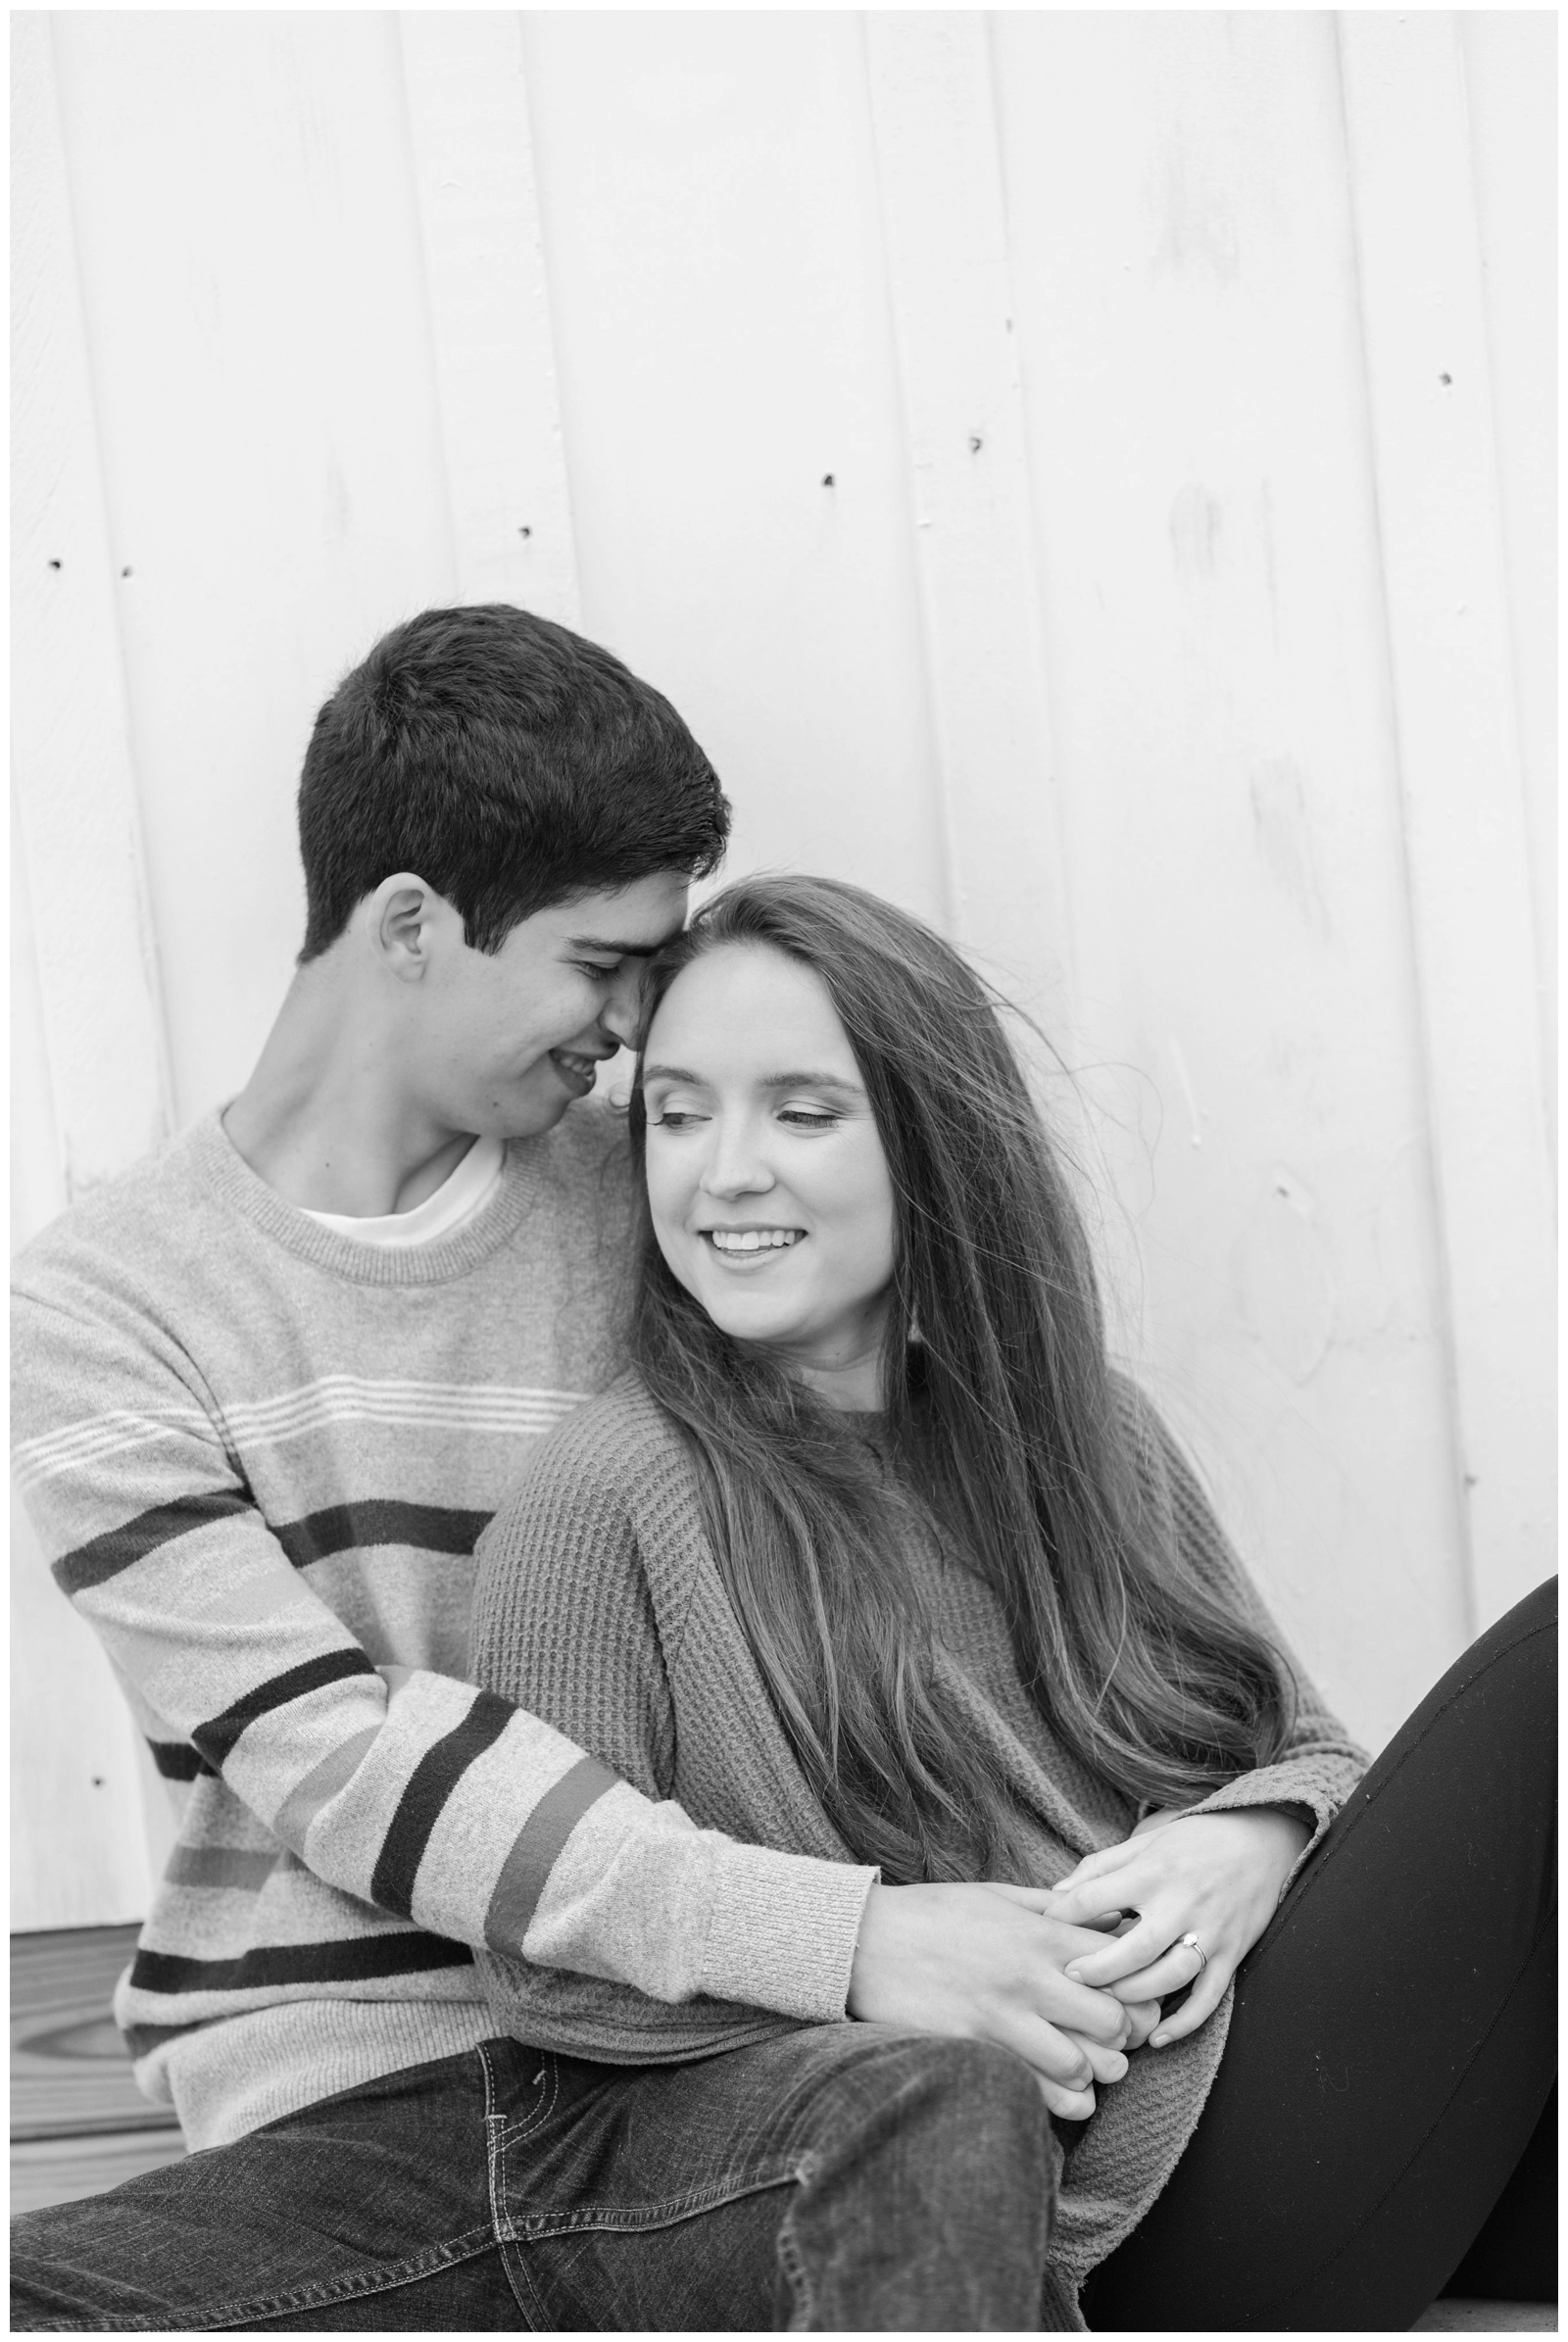 black and white portrait of engaged couple in cozy sweaters by wood paneled wall